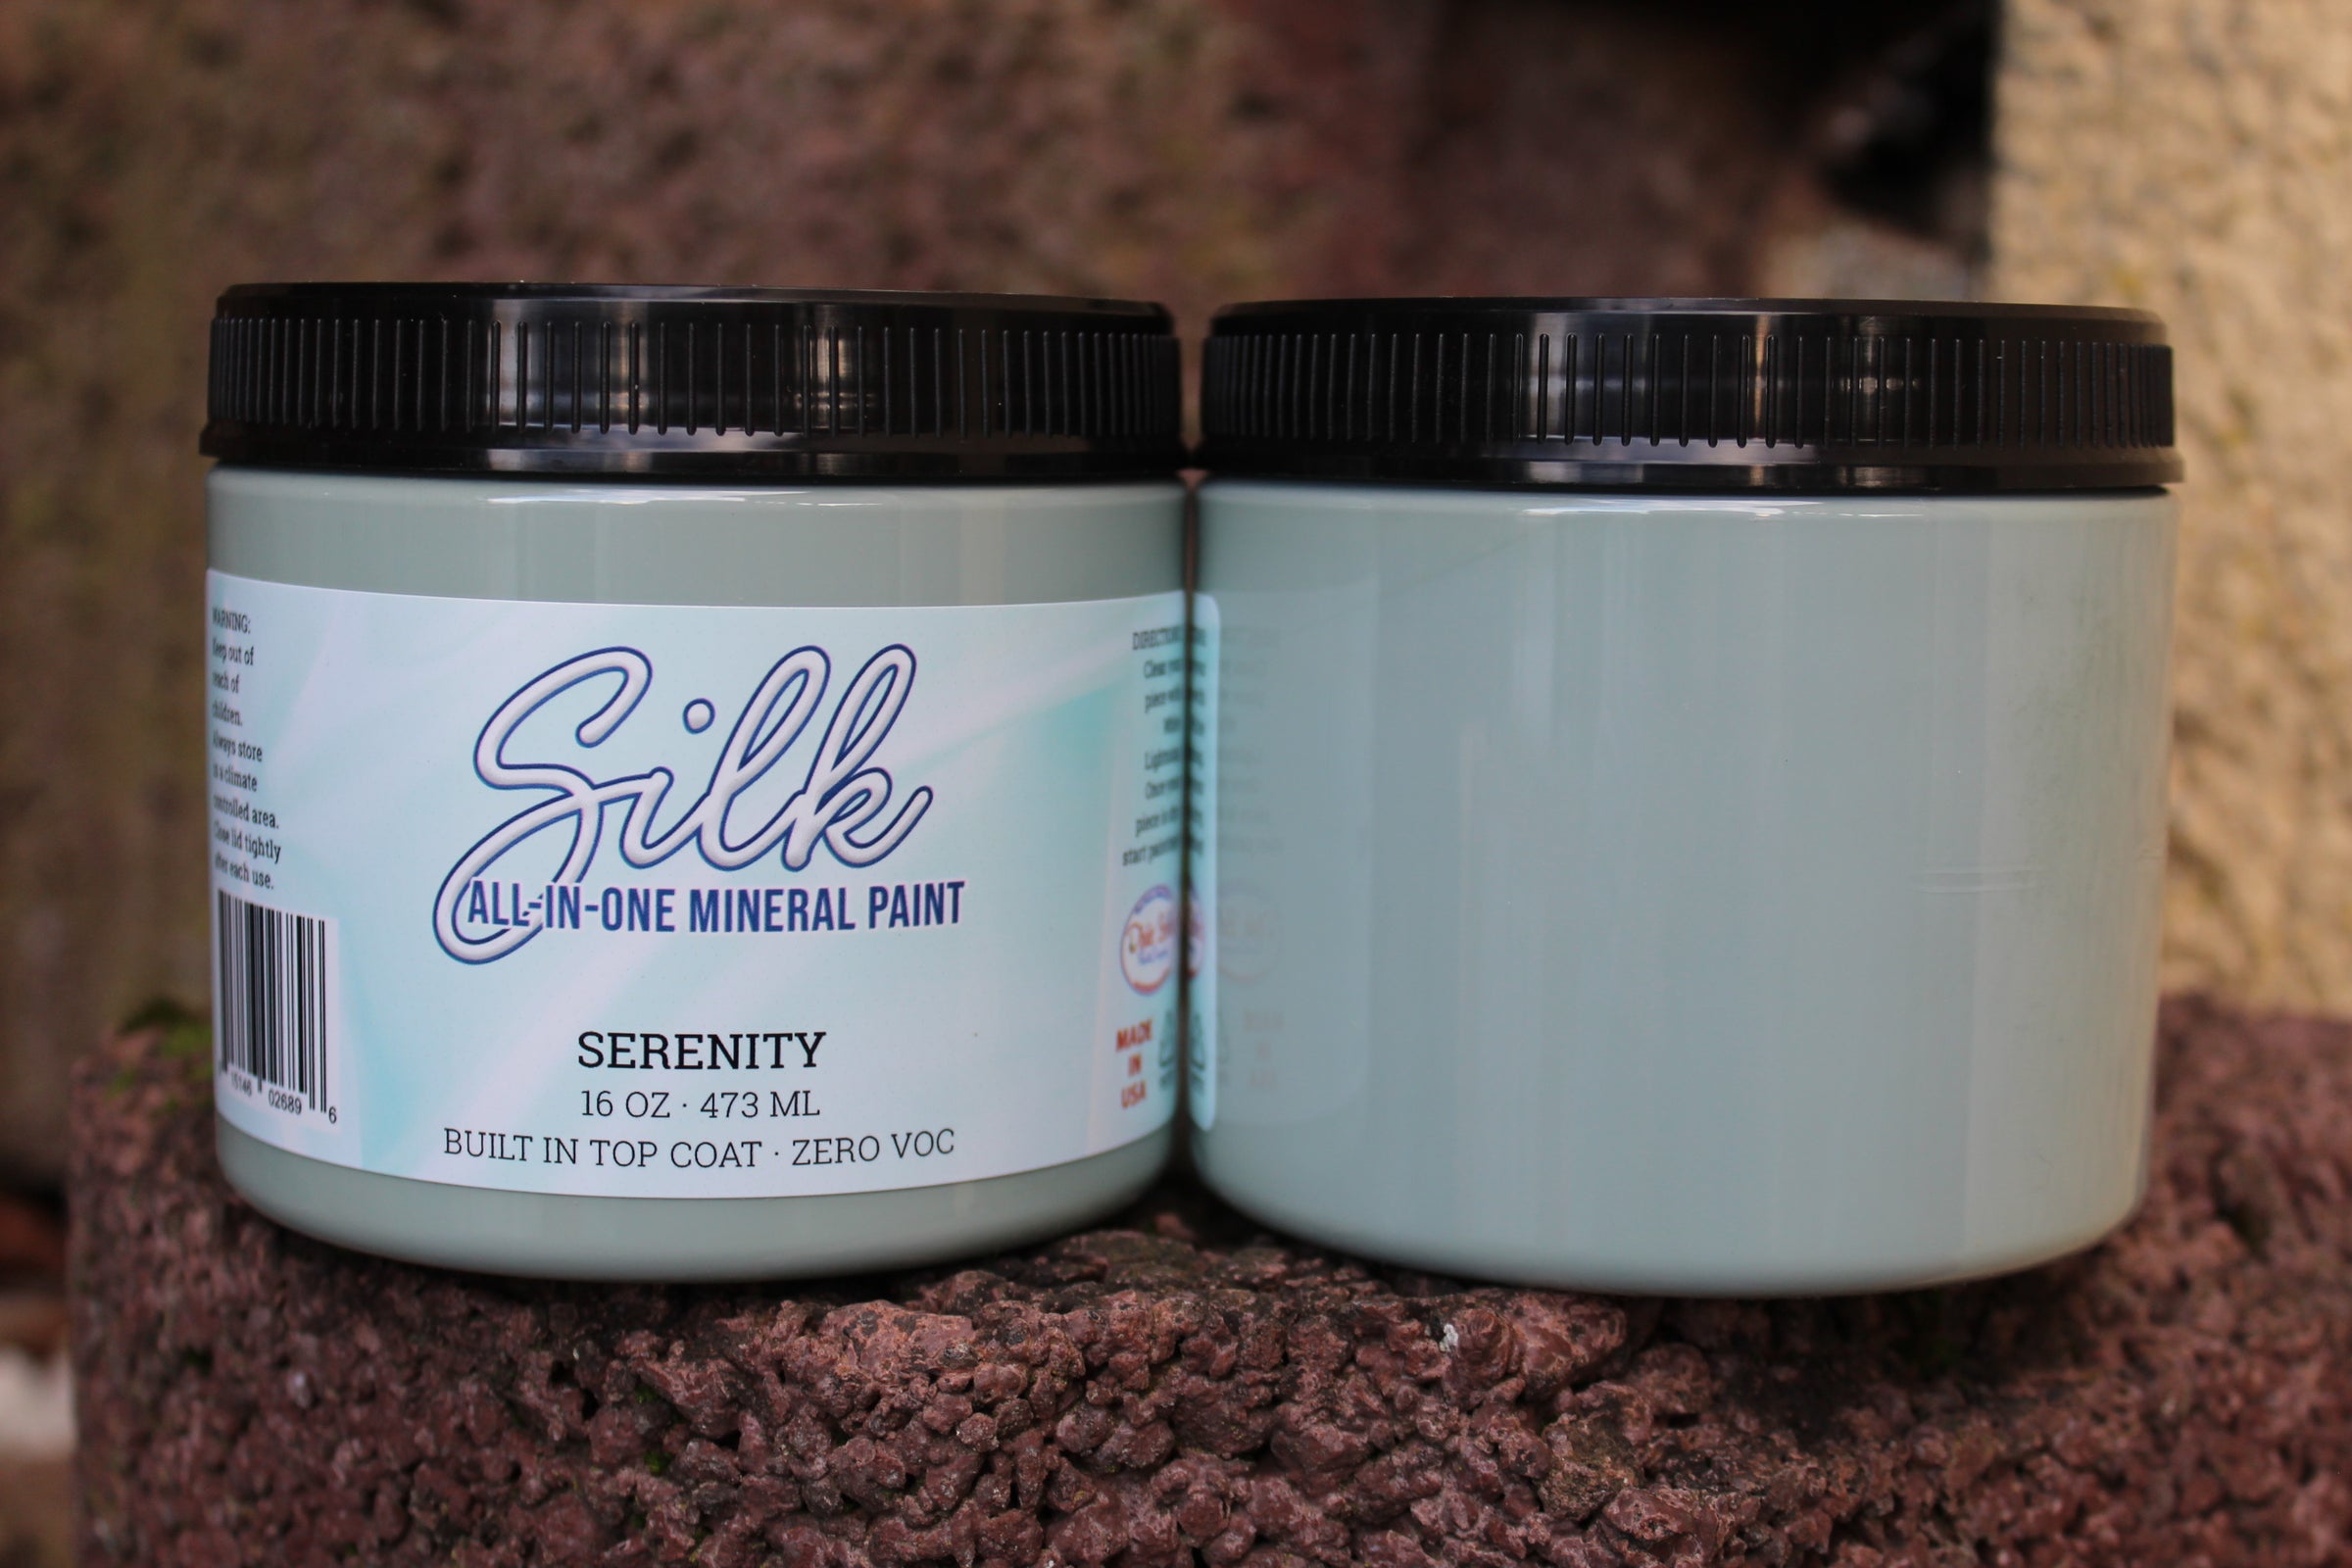  Serenity Silk All-in-One Mineral Chalk Paint for